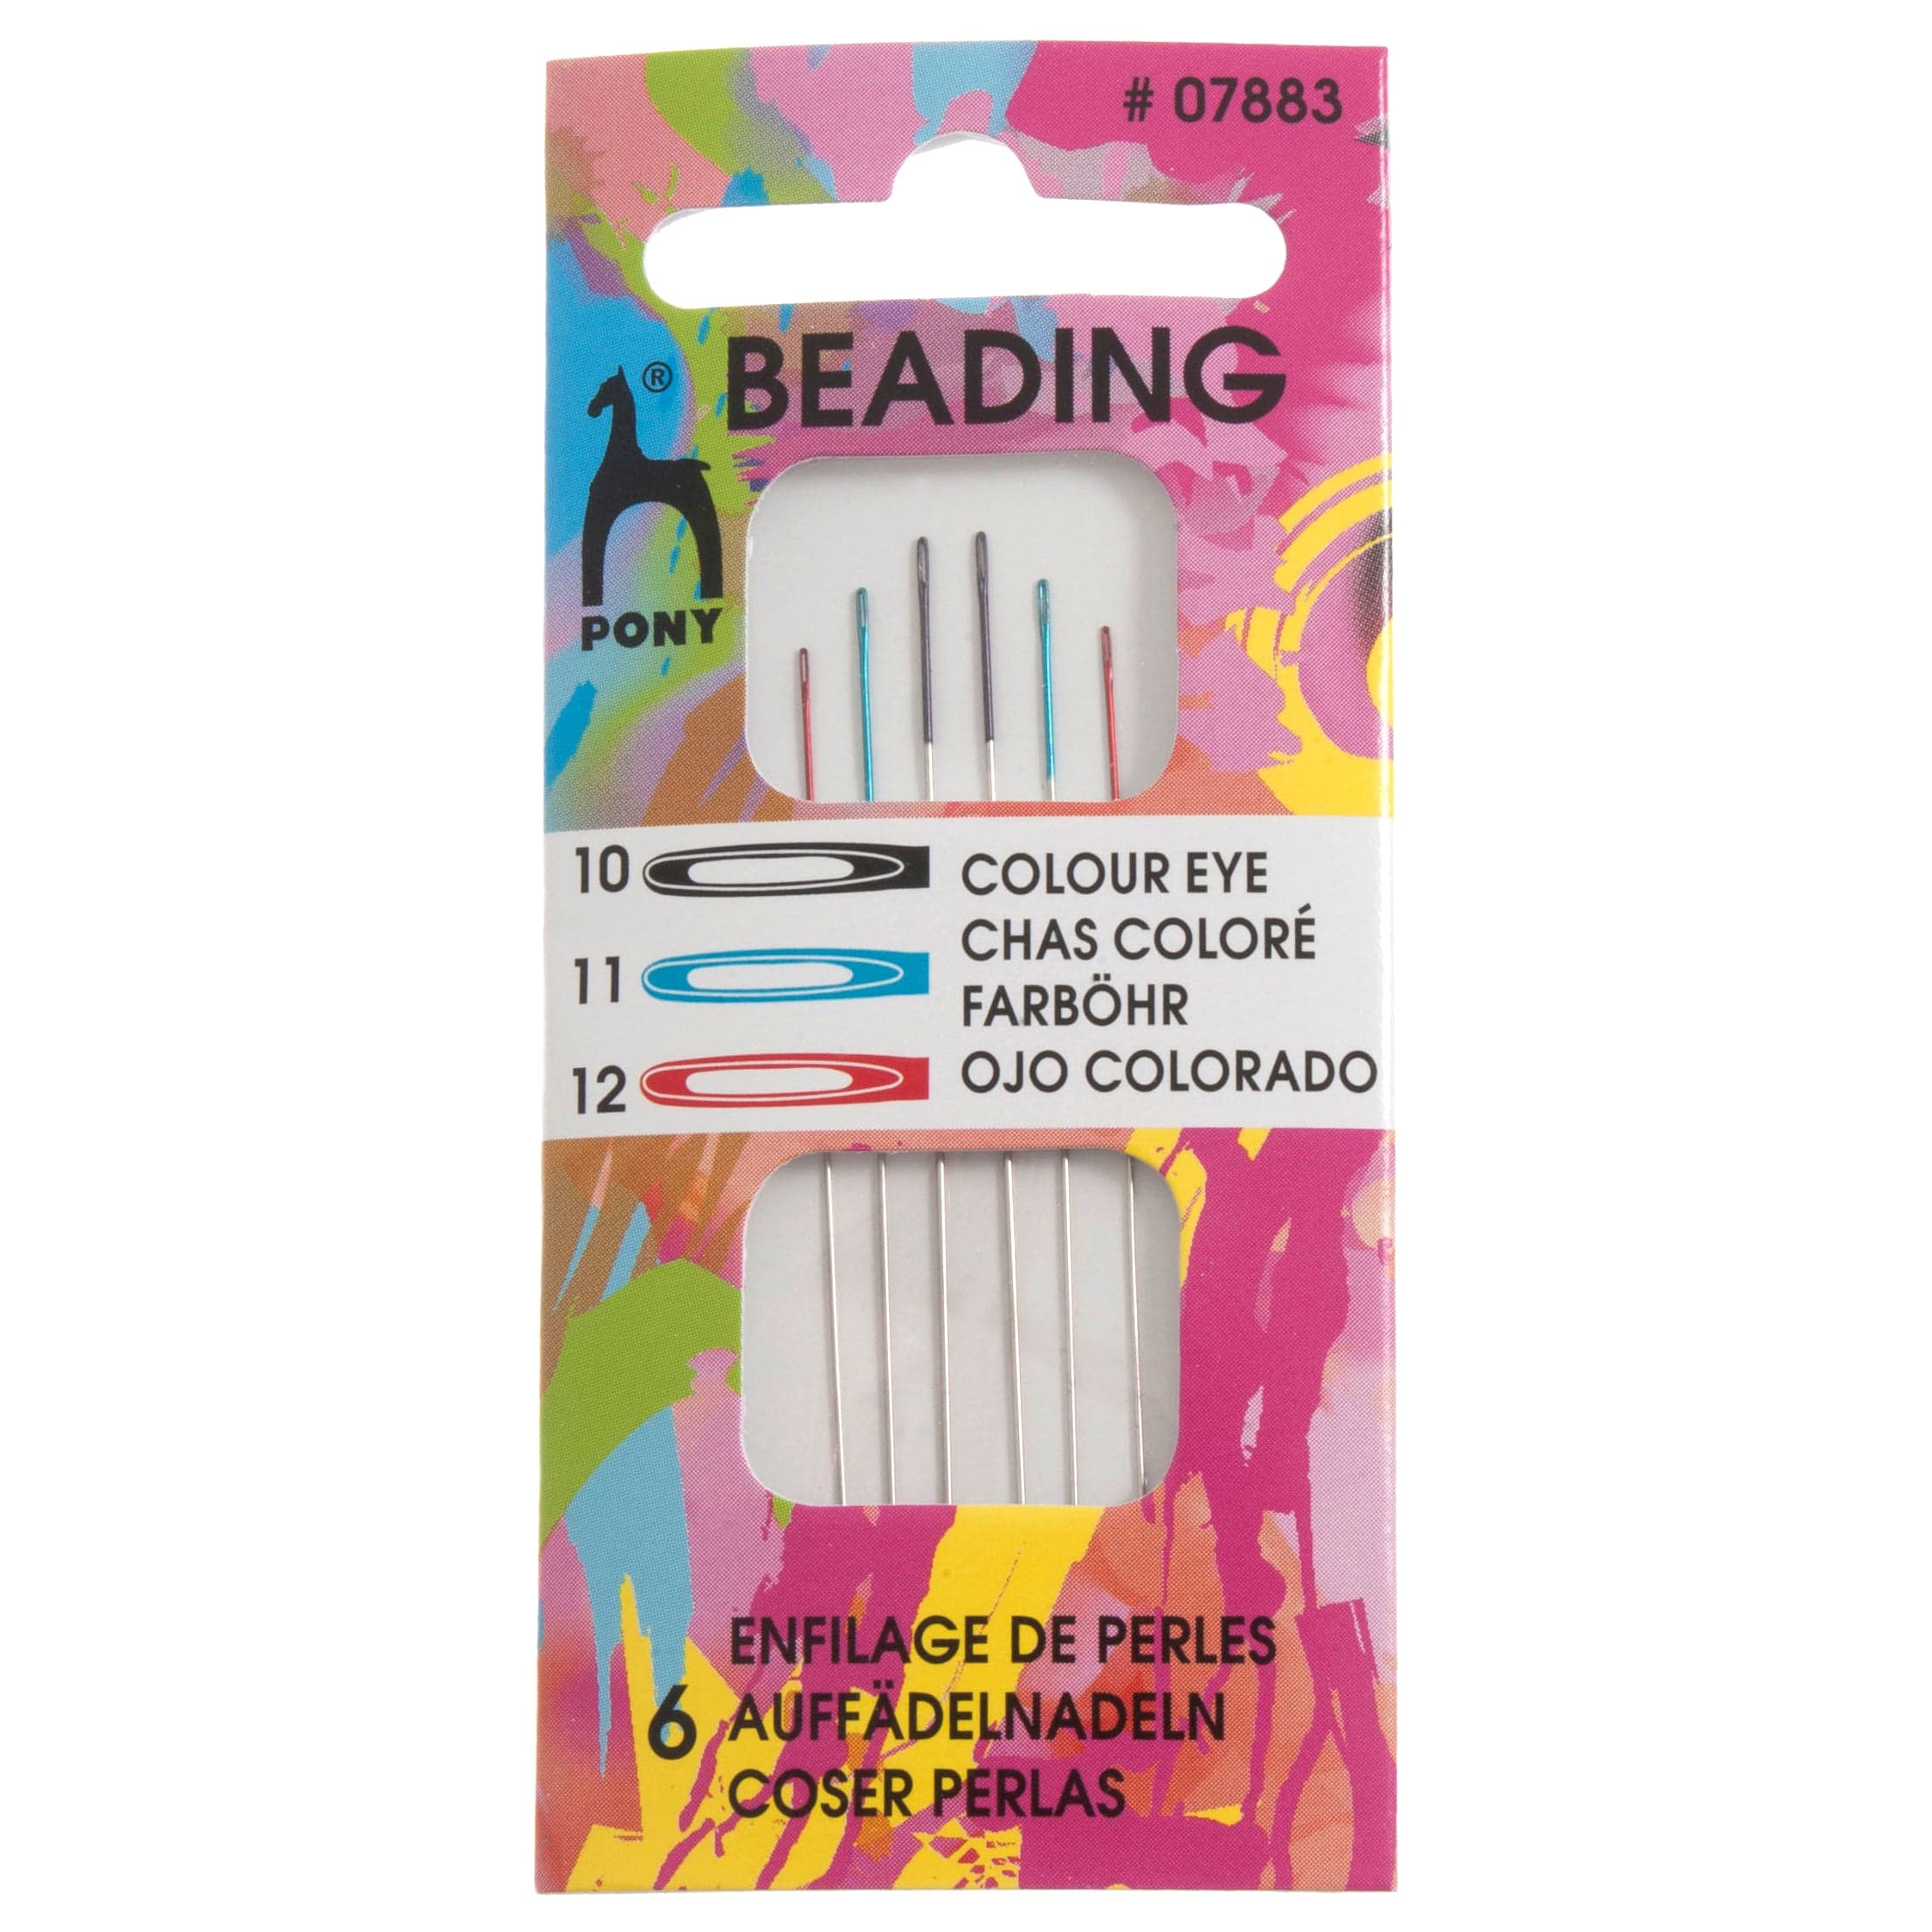 Pony Accessories Pony Pack of 5 Beading Needles with Colour-Coded Eye (Size 10/12) 8901003078831